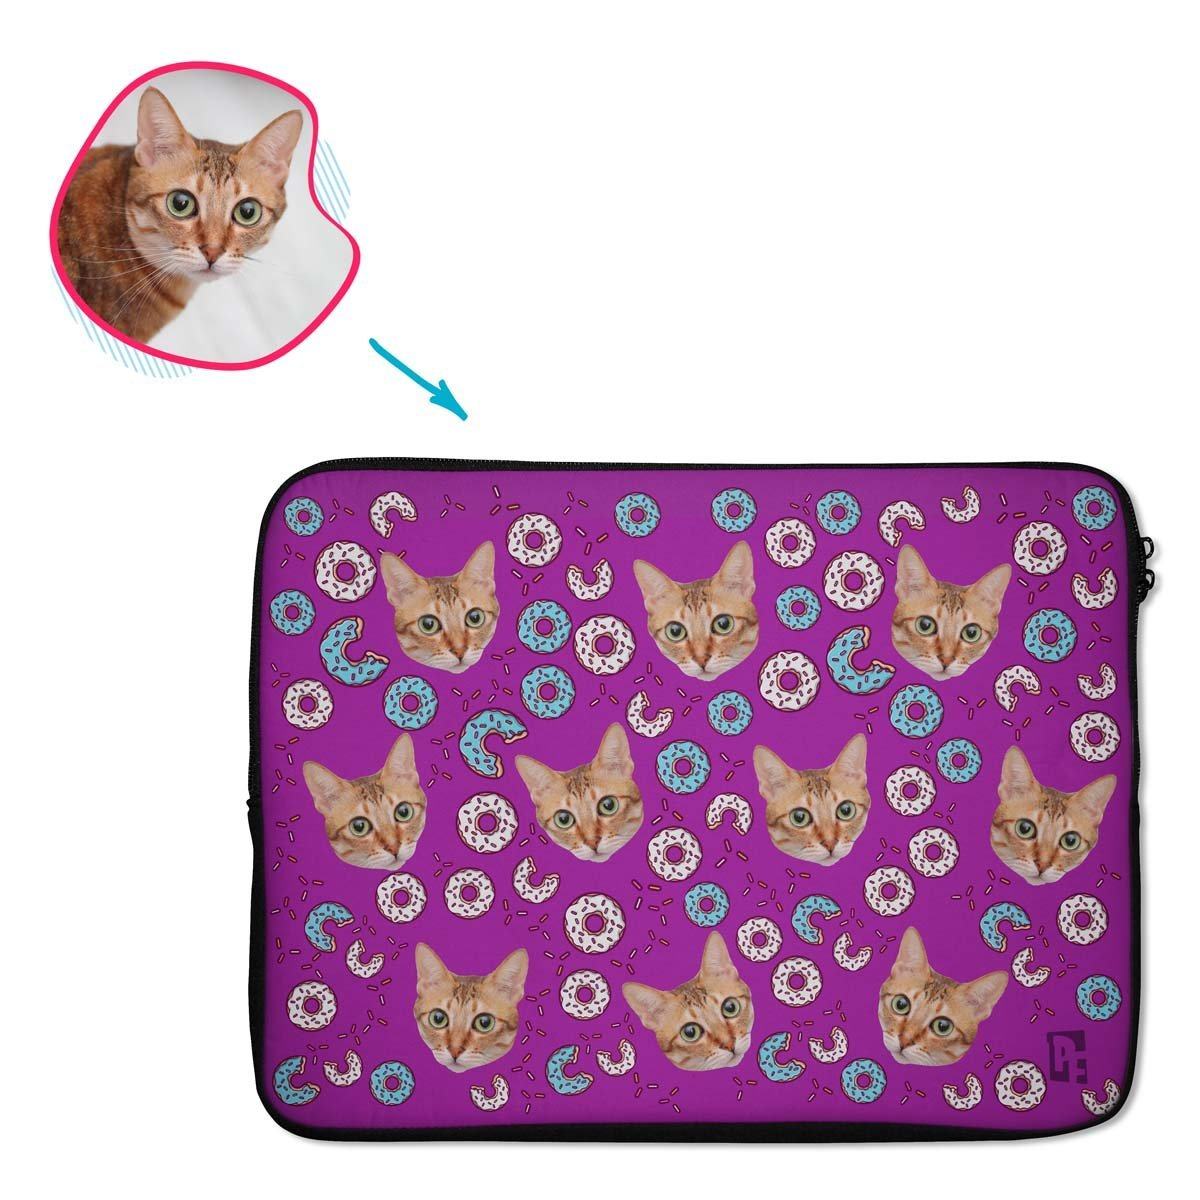 purple Donuts laptop sleeve personalized with photo of face printed on them